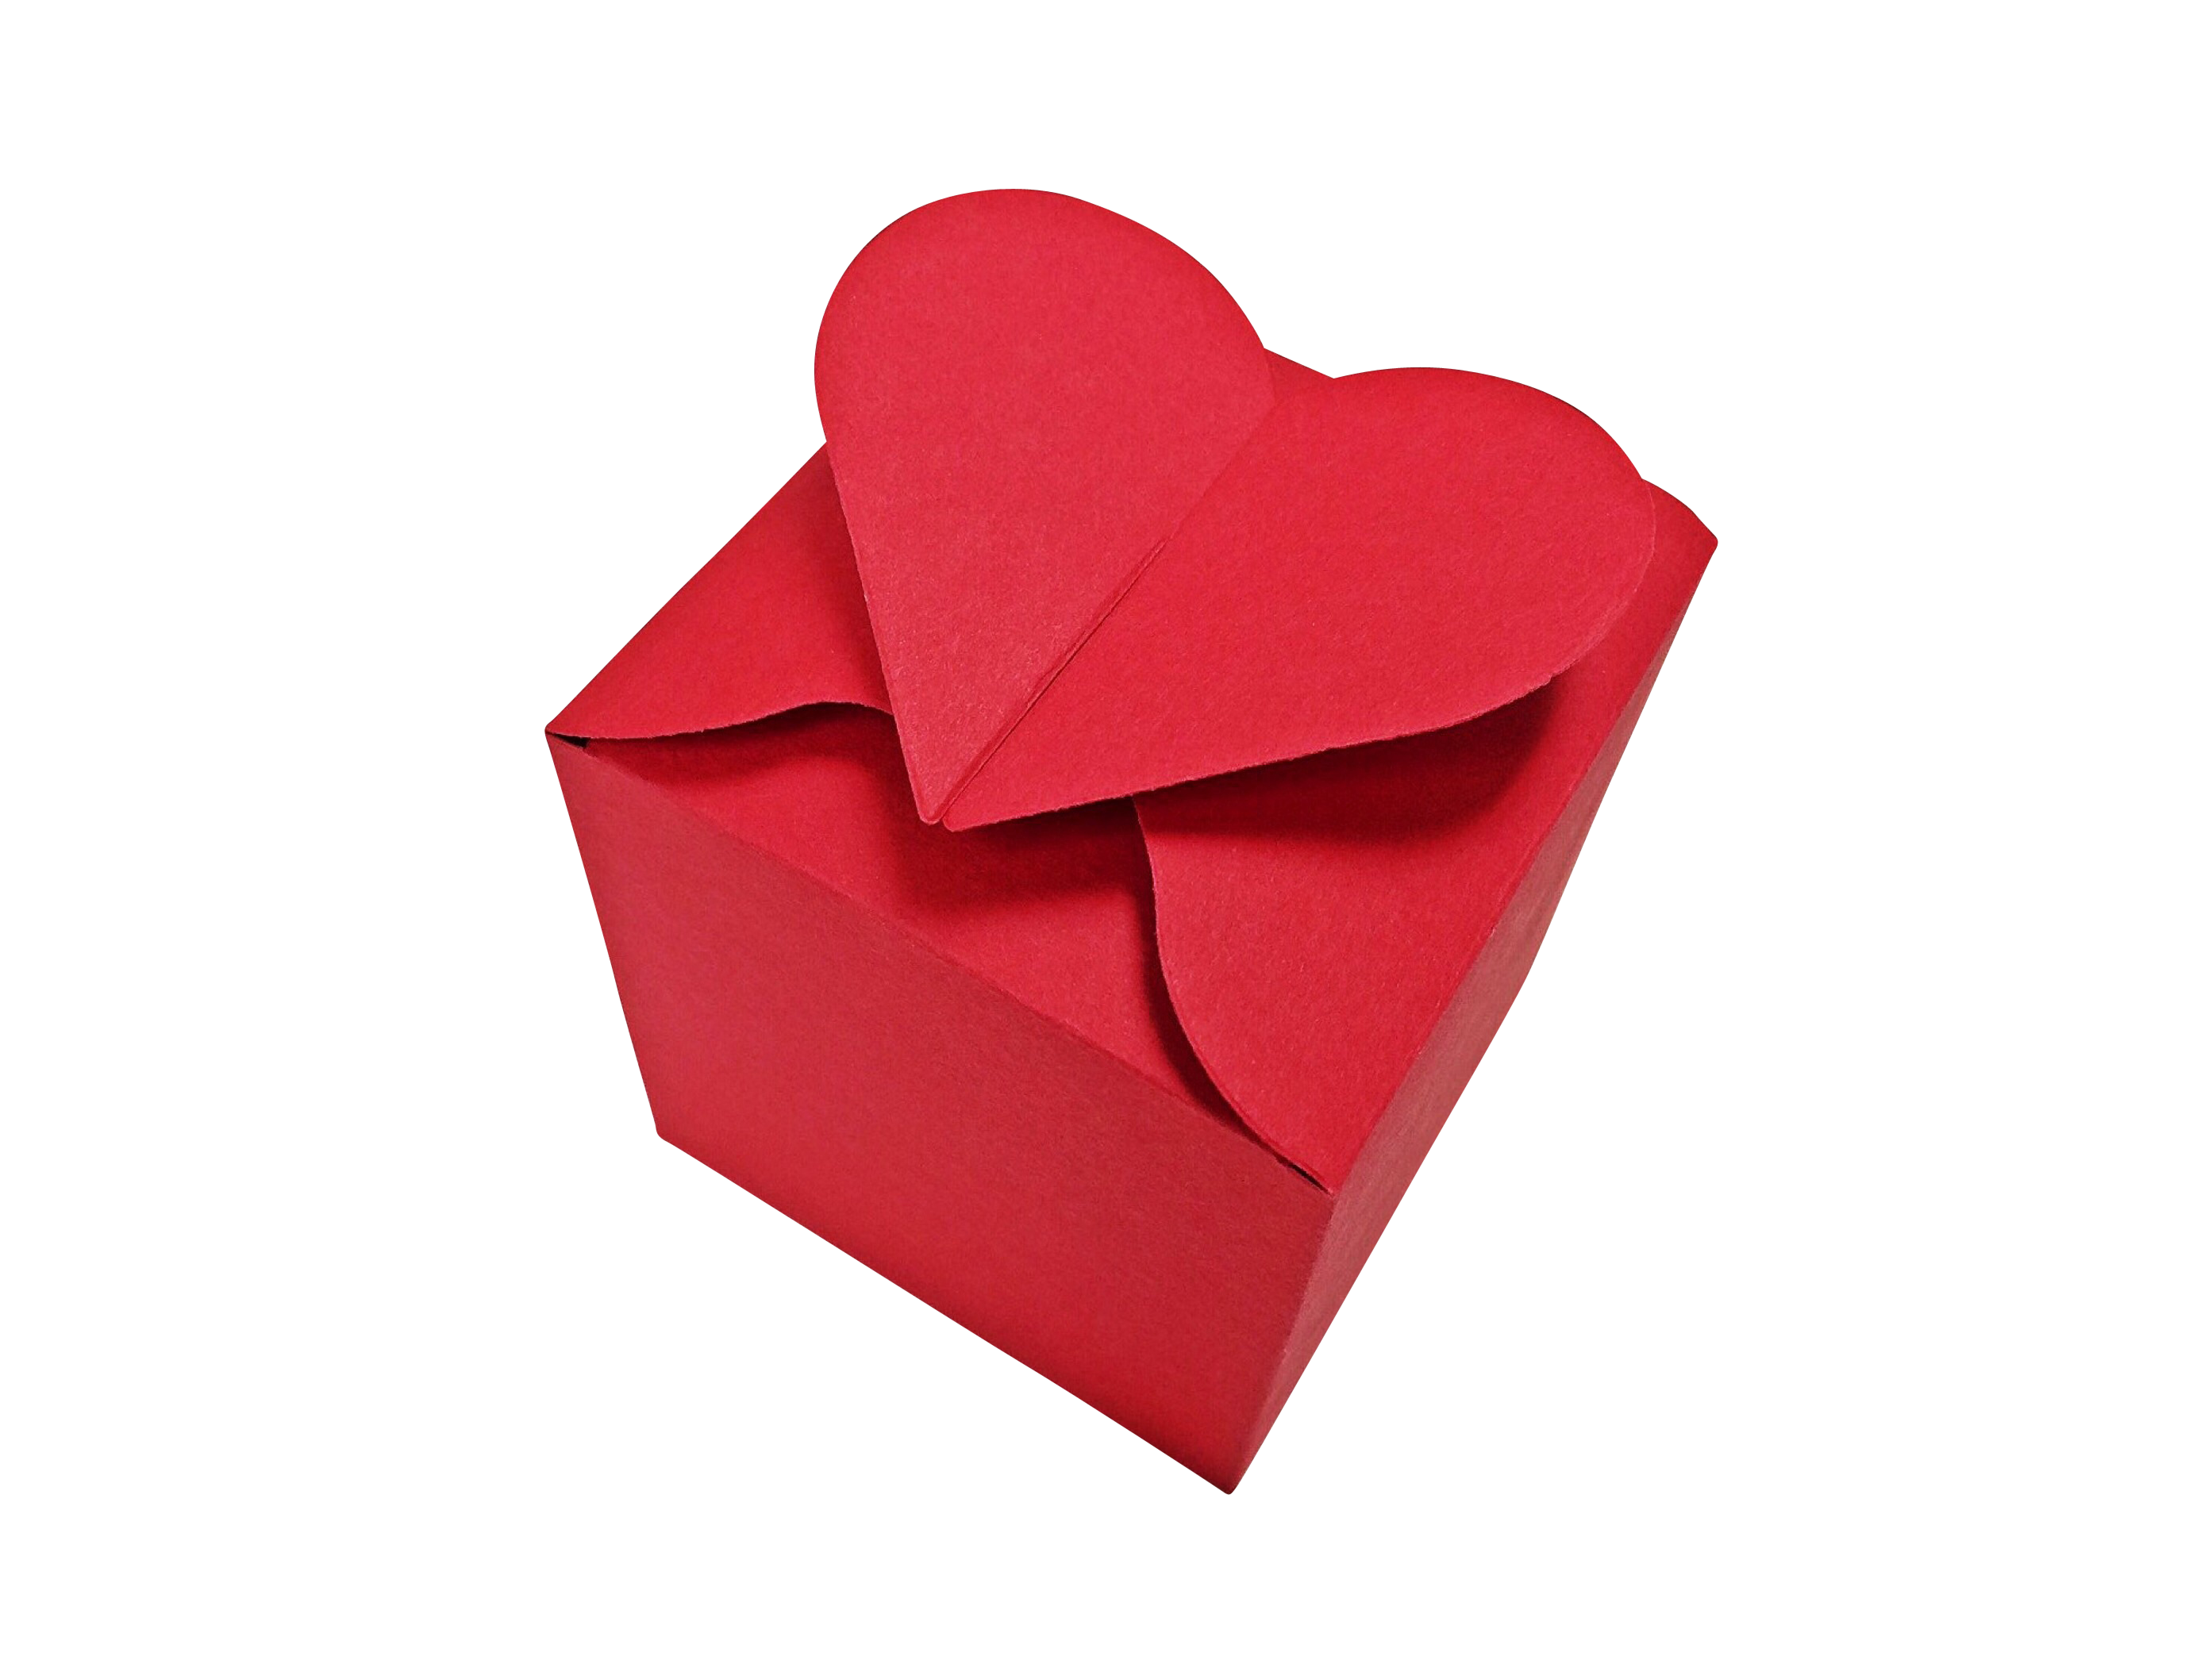 A Red Box With A Heart Shaped Paper